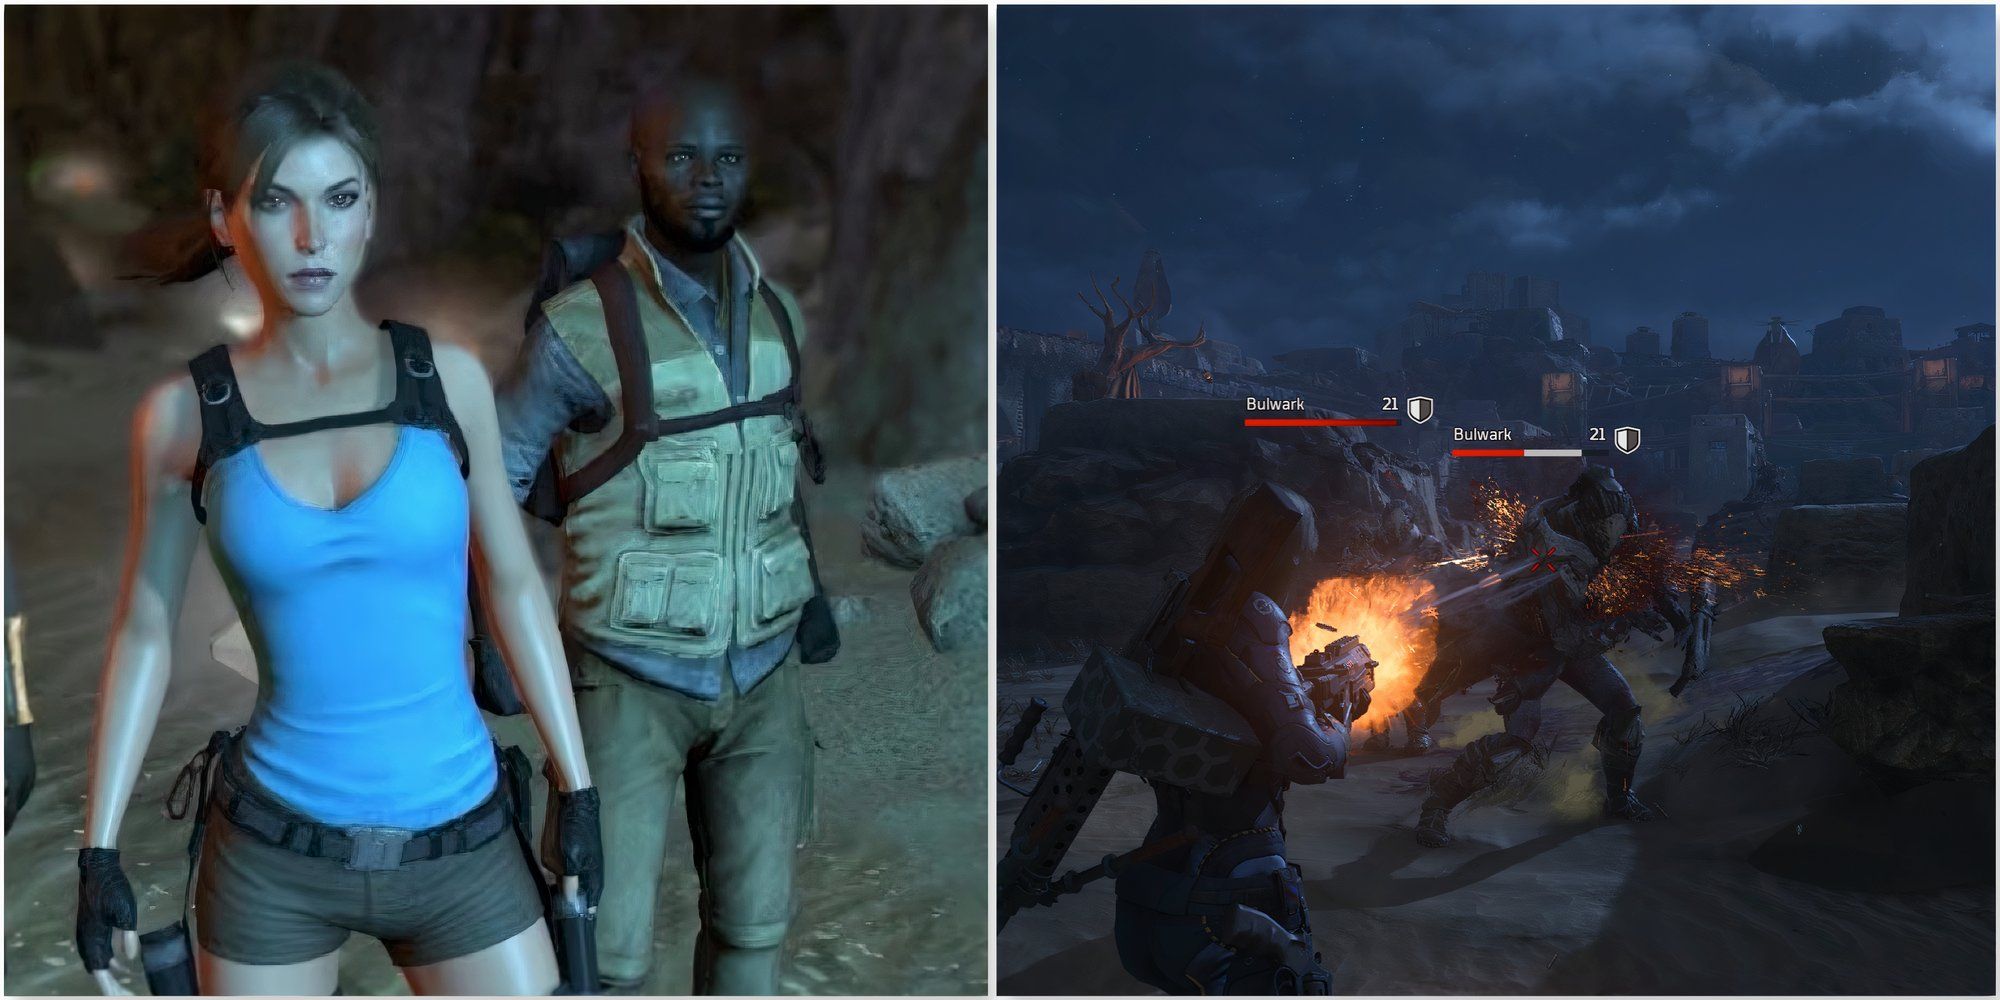 A cutscene featuring characters in Lara Croft And The Temple Of Osiris and Fighting enemies in Outriders